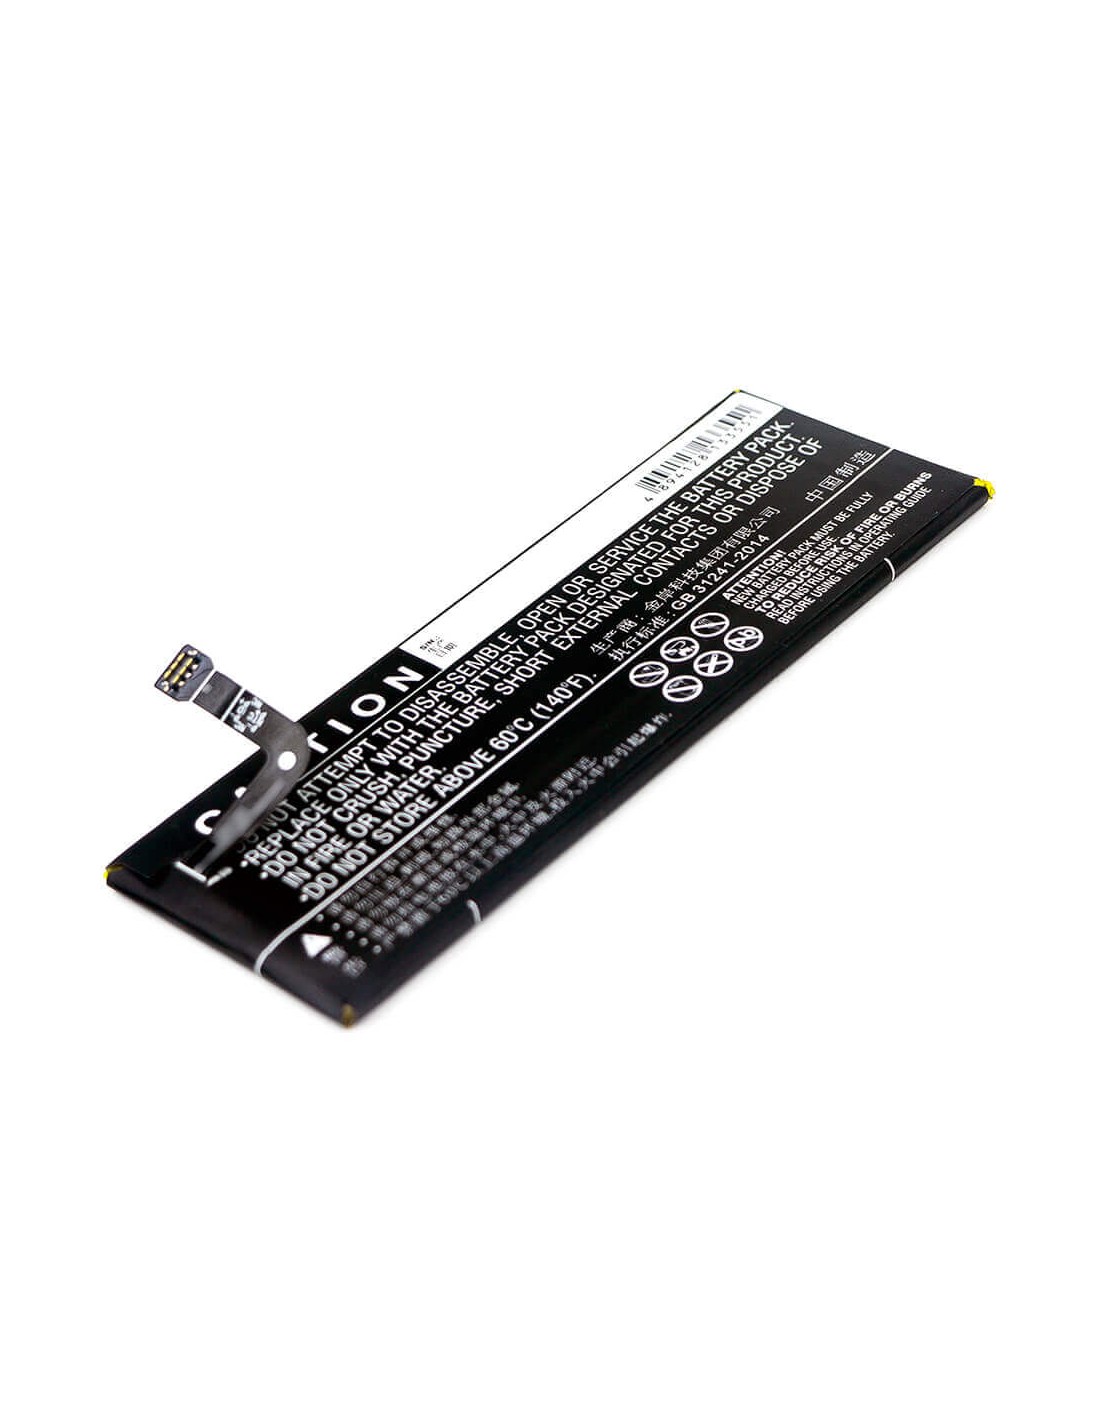 Battery for Gionee, Elife S8, Gn9011, Gn9011l 3.85V, 3000mAh - 11.55Wh